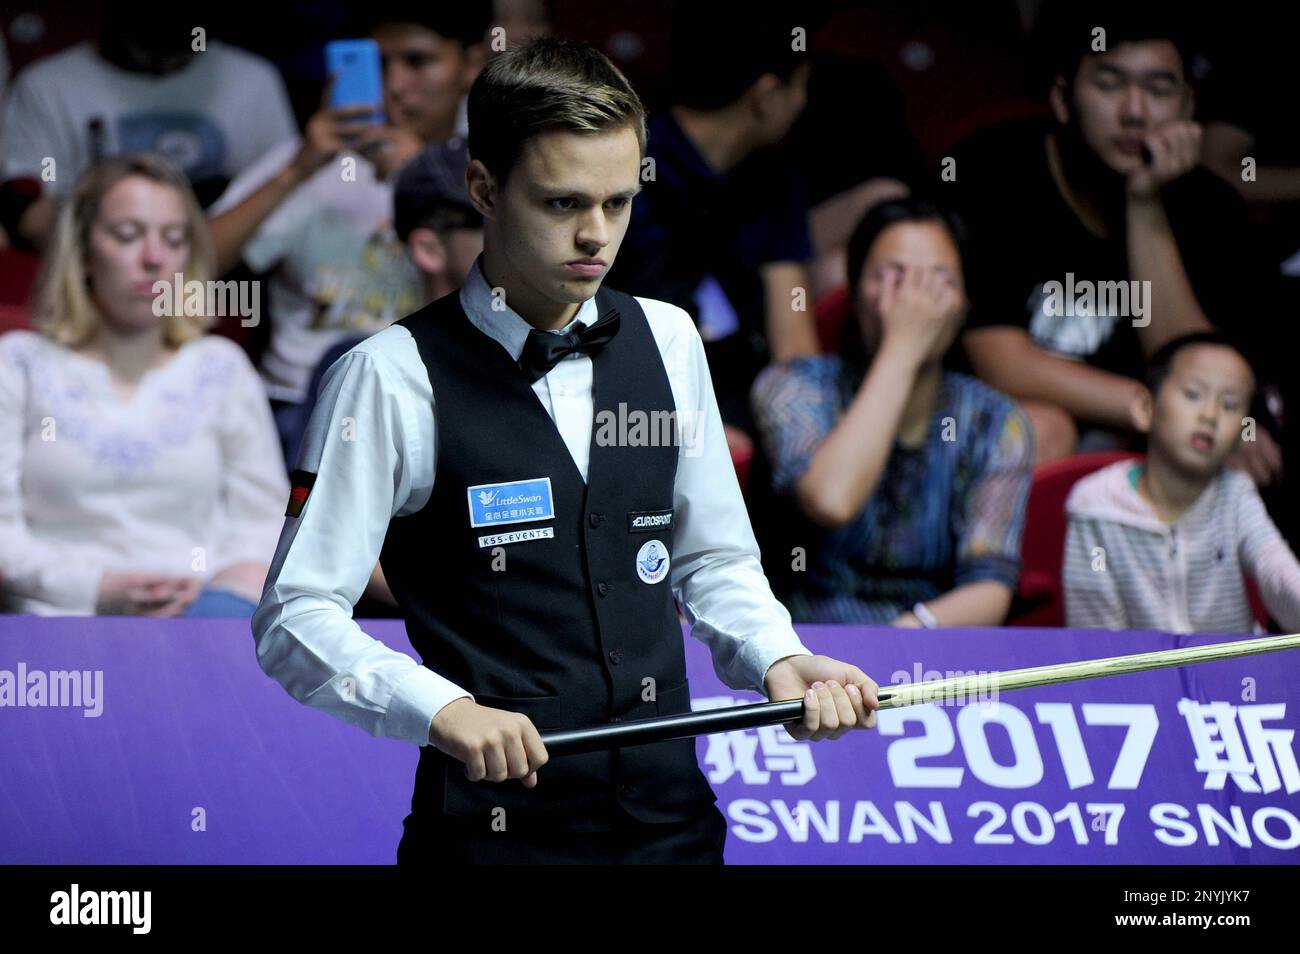 Lukas Kleckers of Germany considers a shot to China A in a Group B match during the 2017 Snooker World Cup Tournament in Wuxi city, east Chinas Jiangsu province, 4 July 2017.China